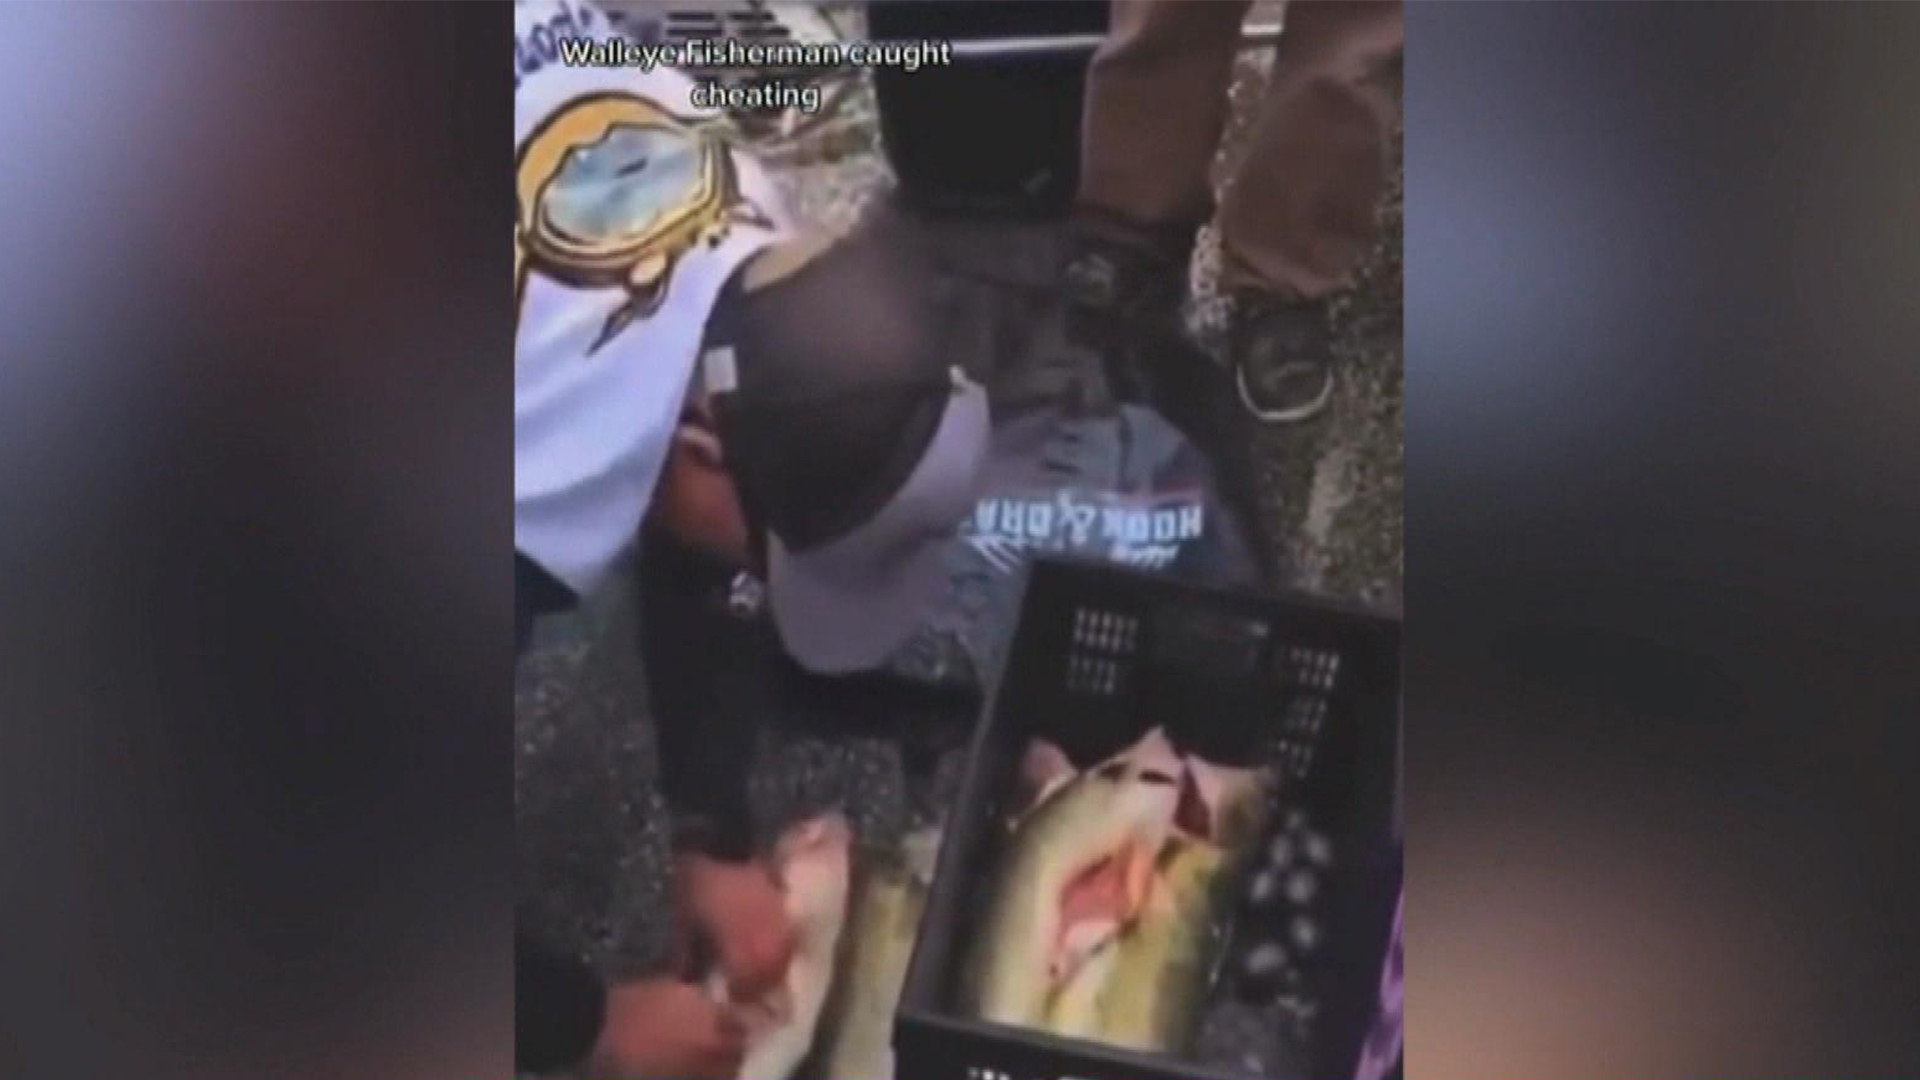 Watch CBS Evening News: Fishing competition rocked by cheating